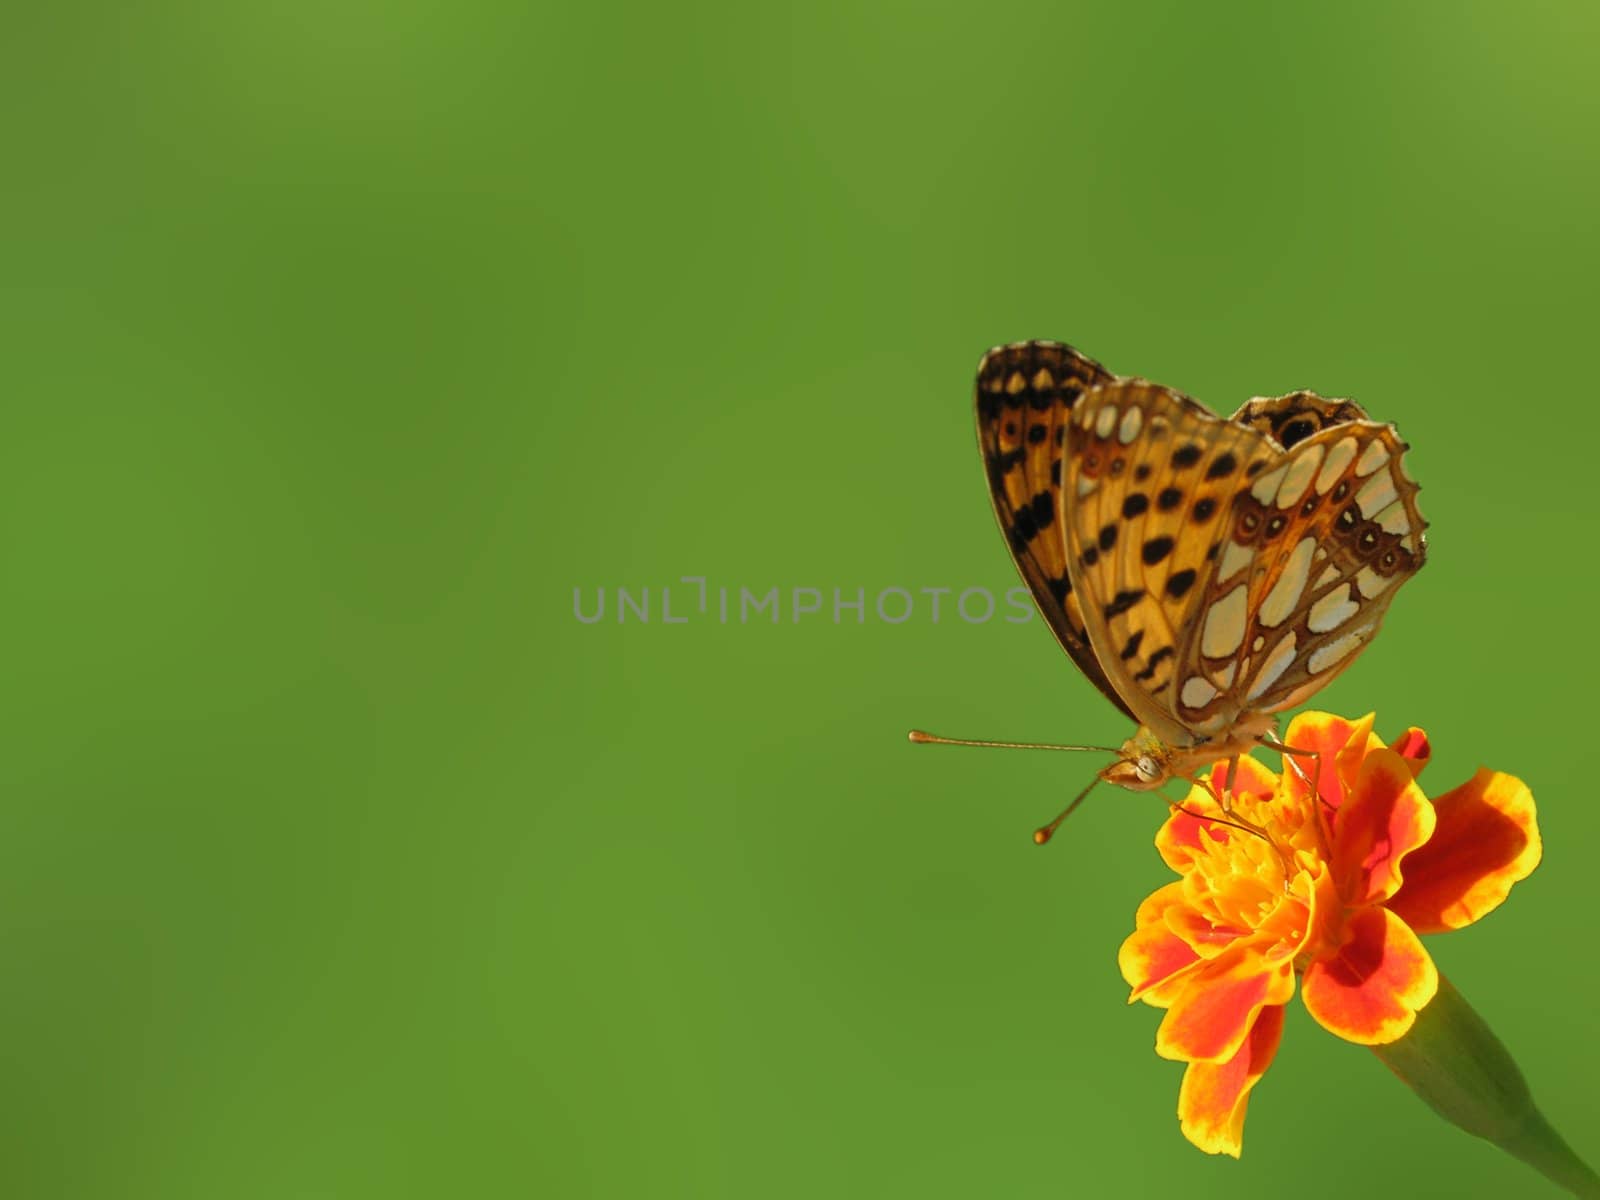 butterfly on flower (marigold) over green background